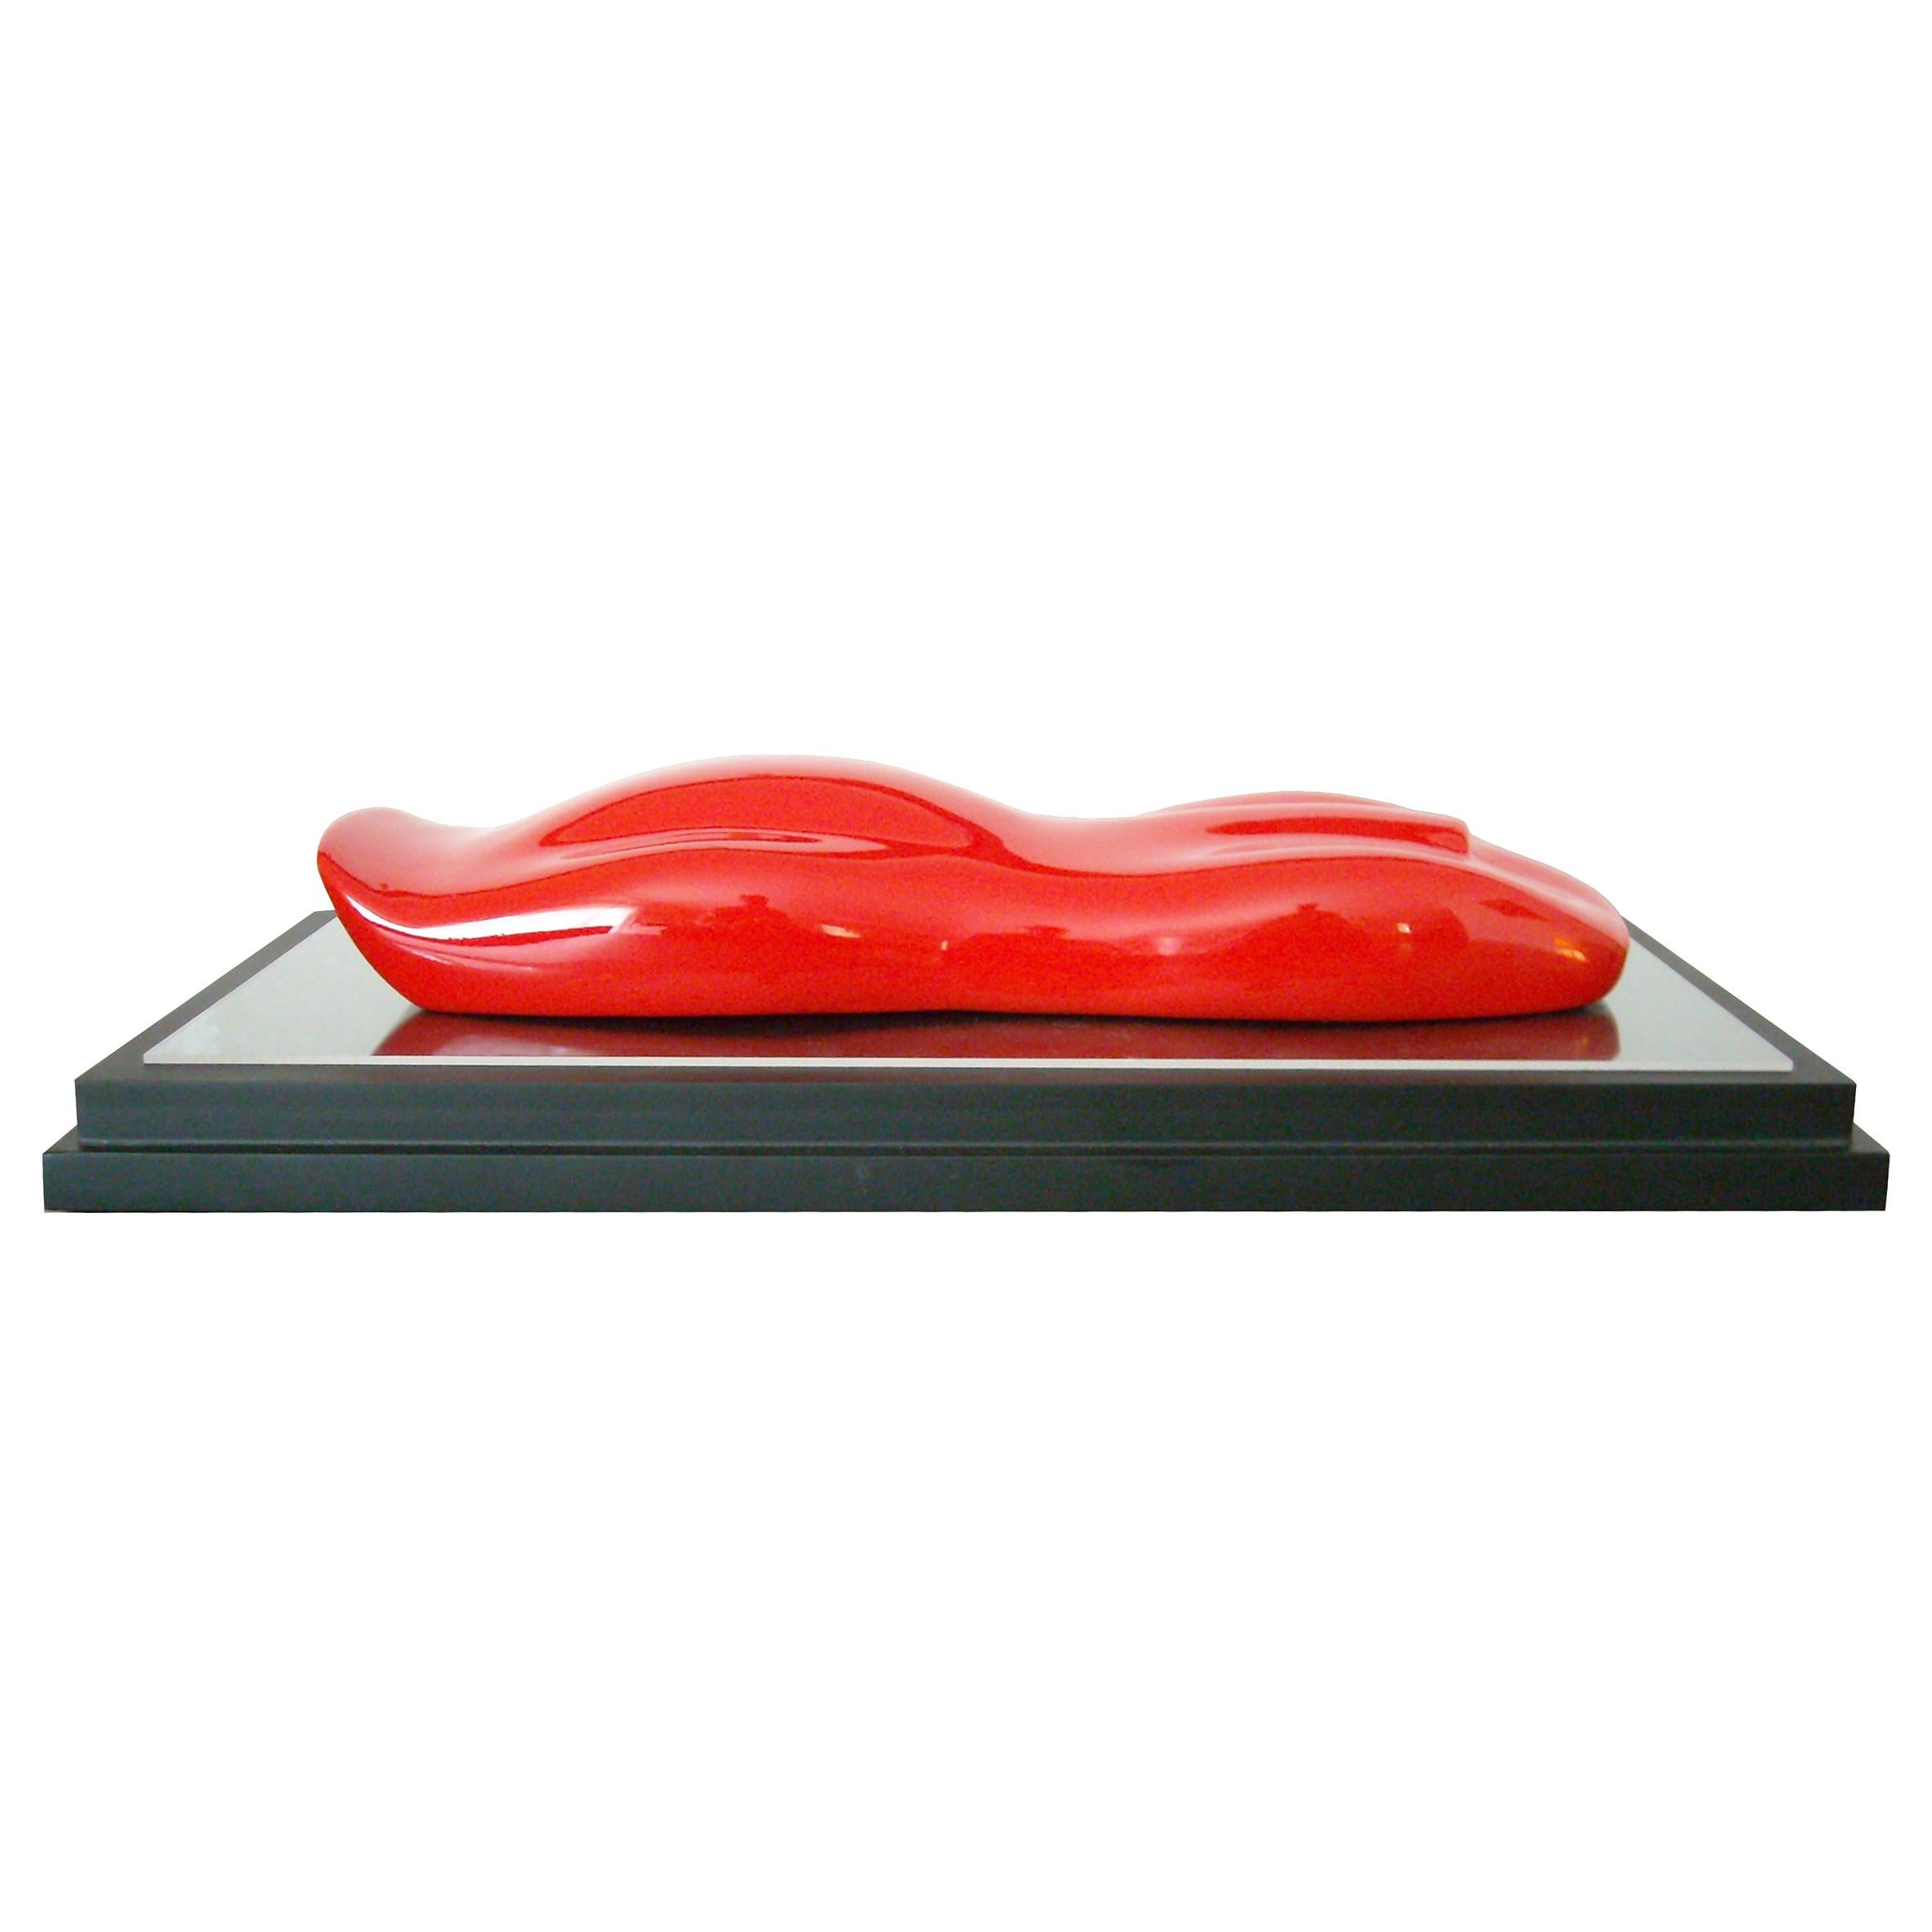 Lacquered Belzoni, a Racing Car Sculpture, 